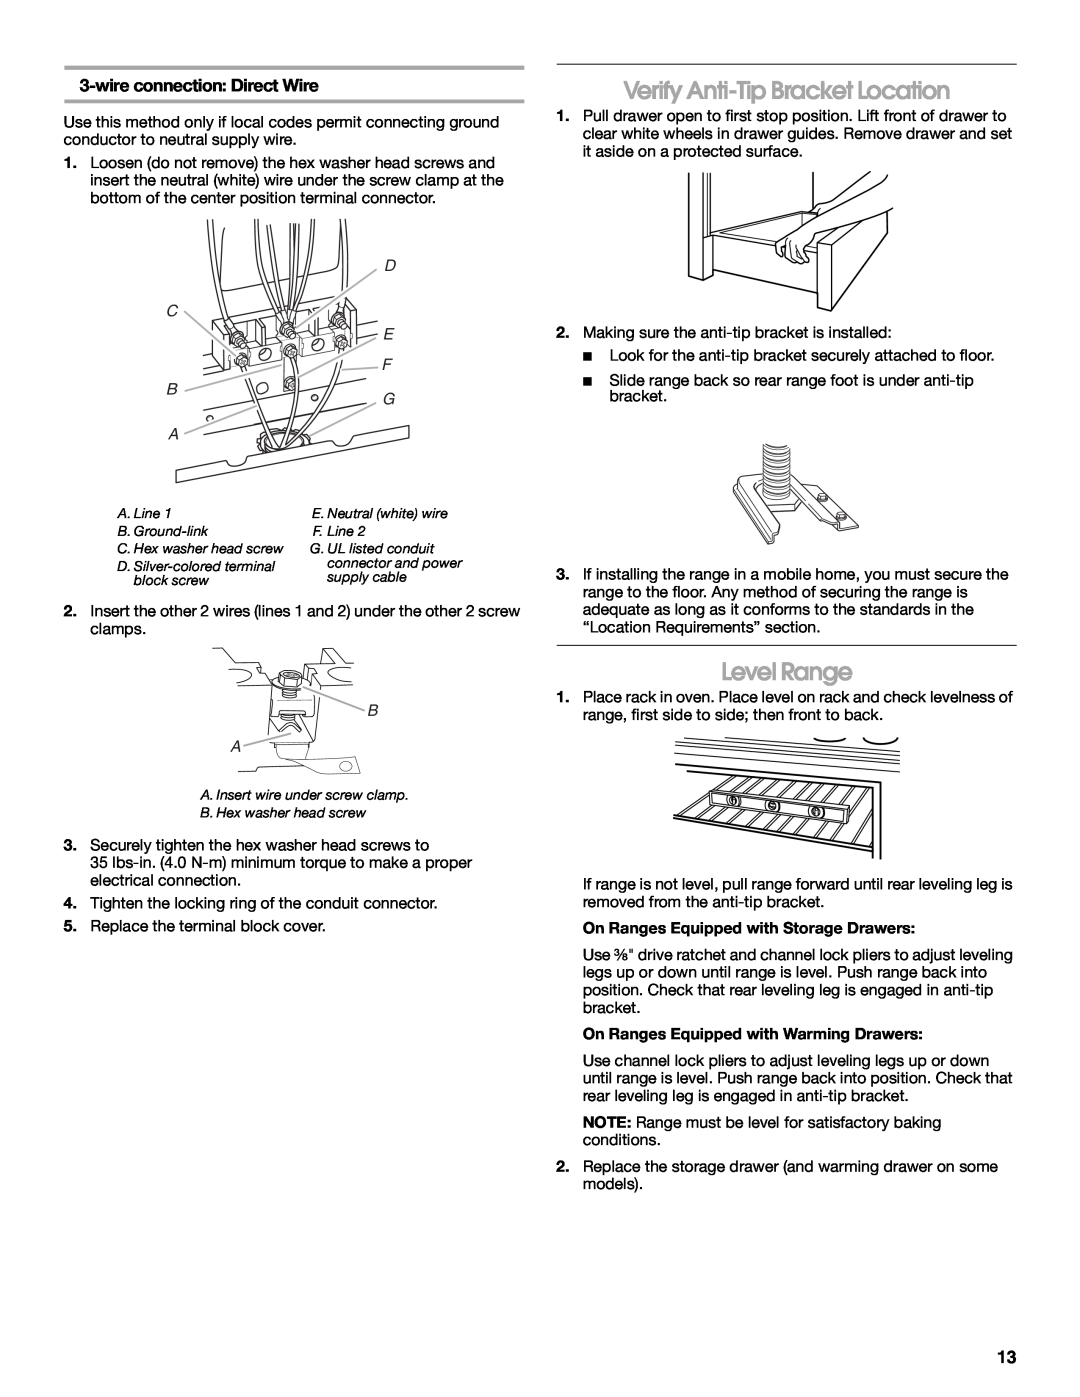 Whirlpool 9762035A installation instructions Verify Anti-Tip Bracket Location, Level Range, wire connection Direct Wire 